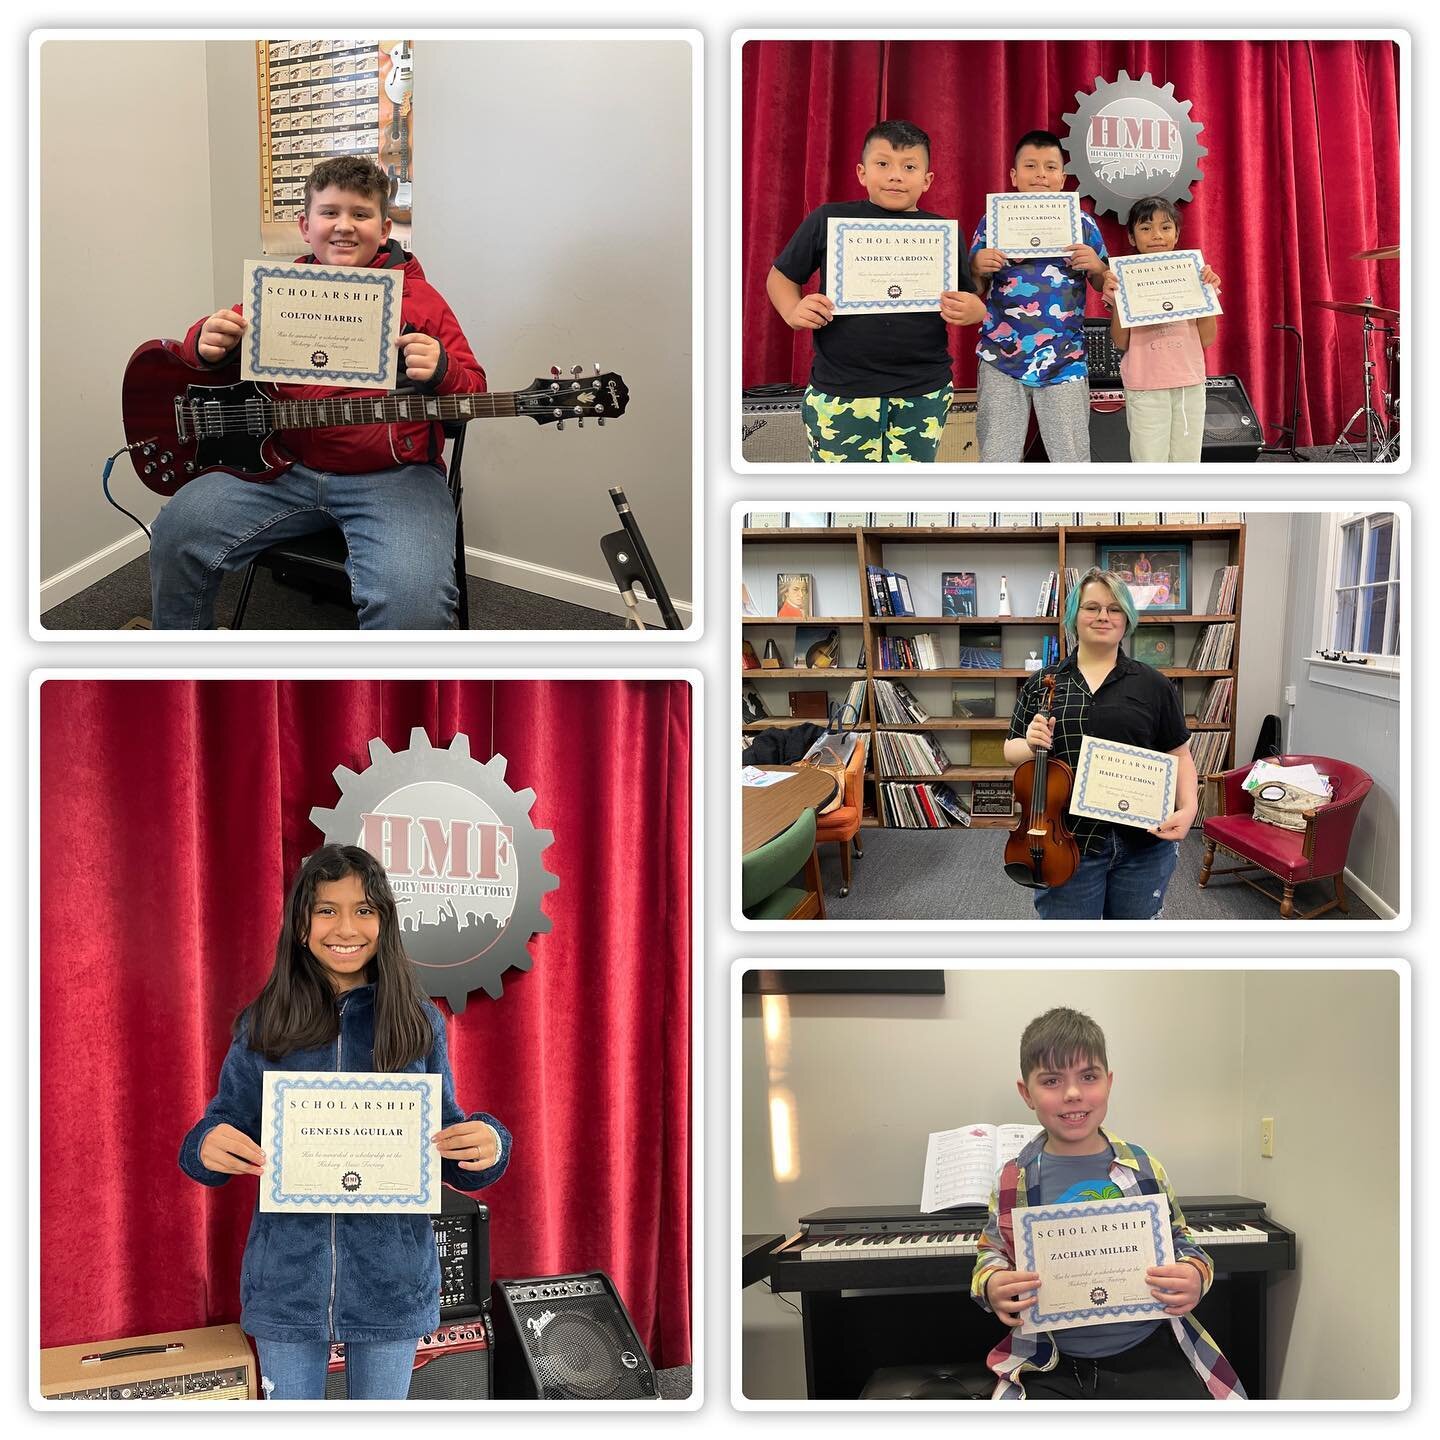 Congratulations to these wonderful kids. They received scholarships for lessons and programs at the Hickory Music Factory. Special thanks to all our contributors that help make this possible. #supportmusiceducation #thankyou #music